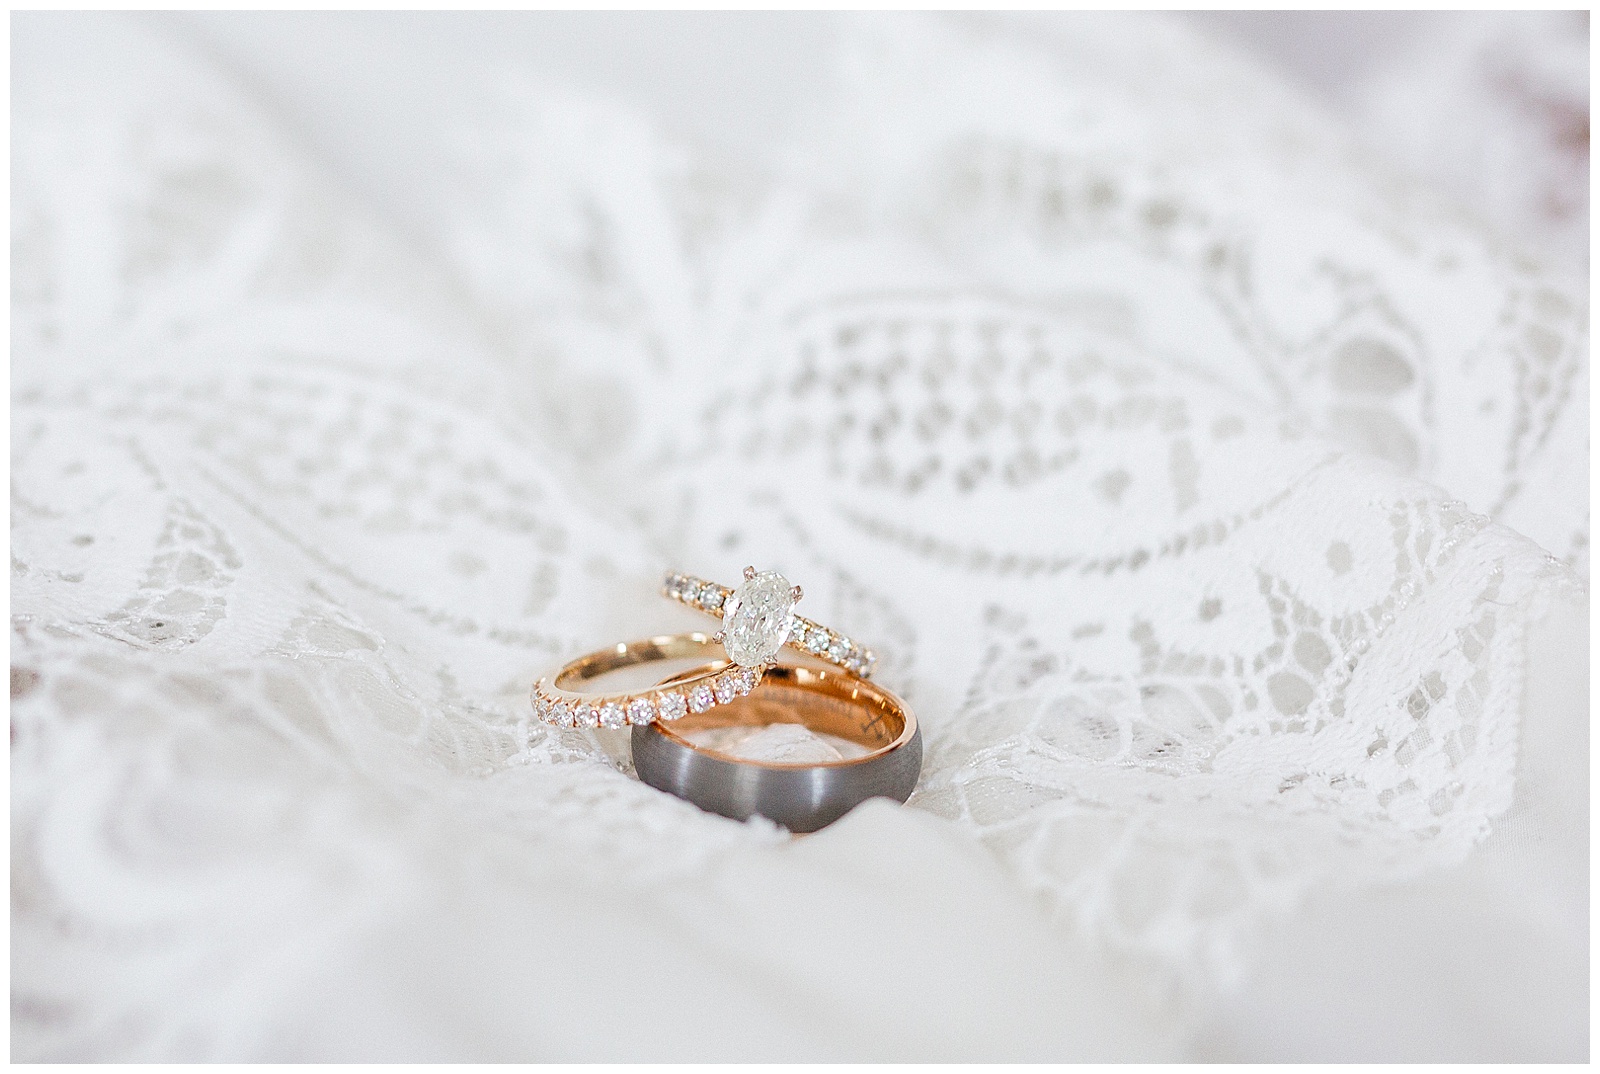 Gold Wedding Bands on Lace - Bright Boho Chic Theme in Charlotte, North Carolina | check out the full wedding at KevynDixonPhoto.com